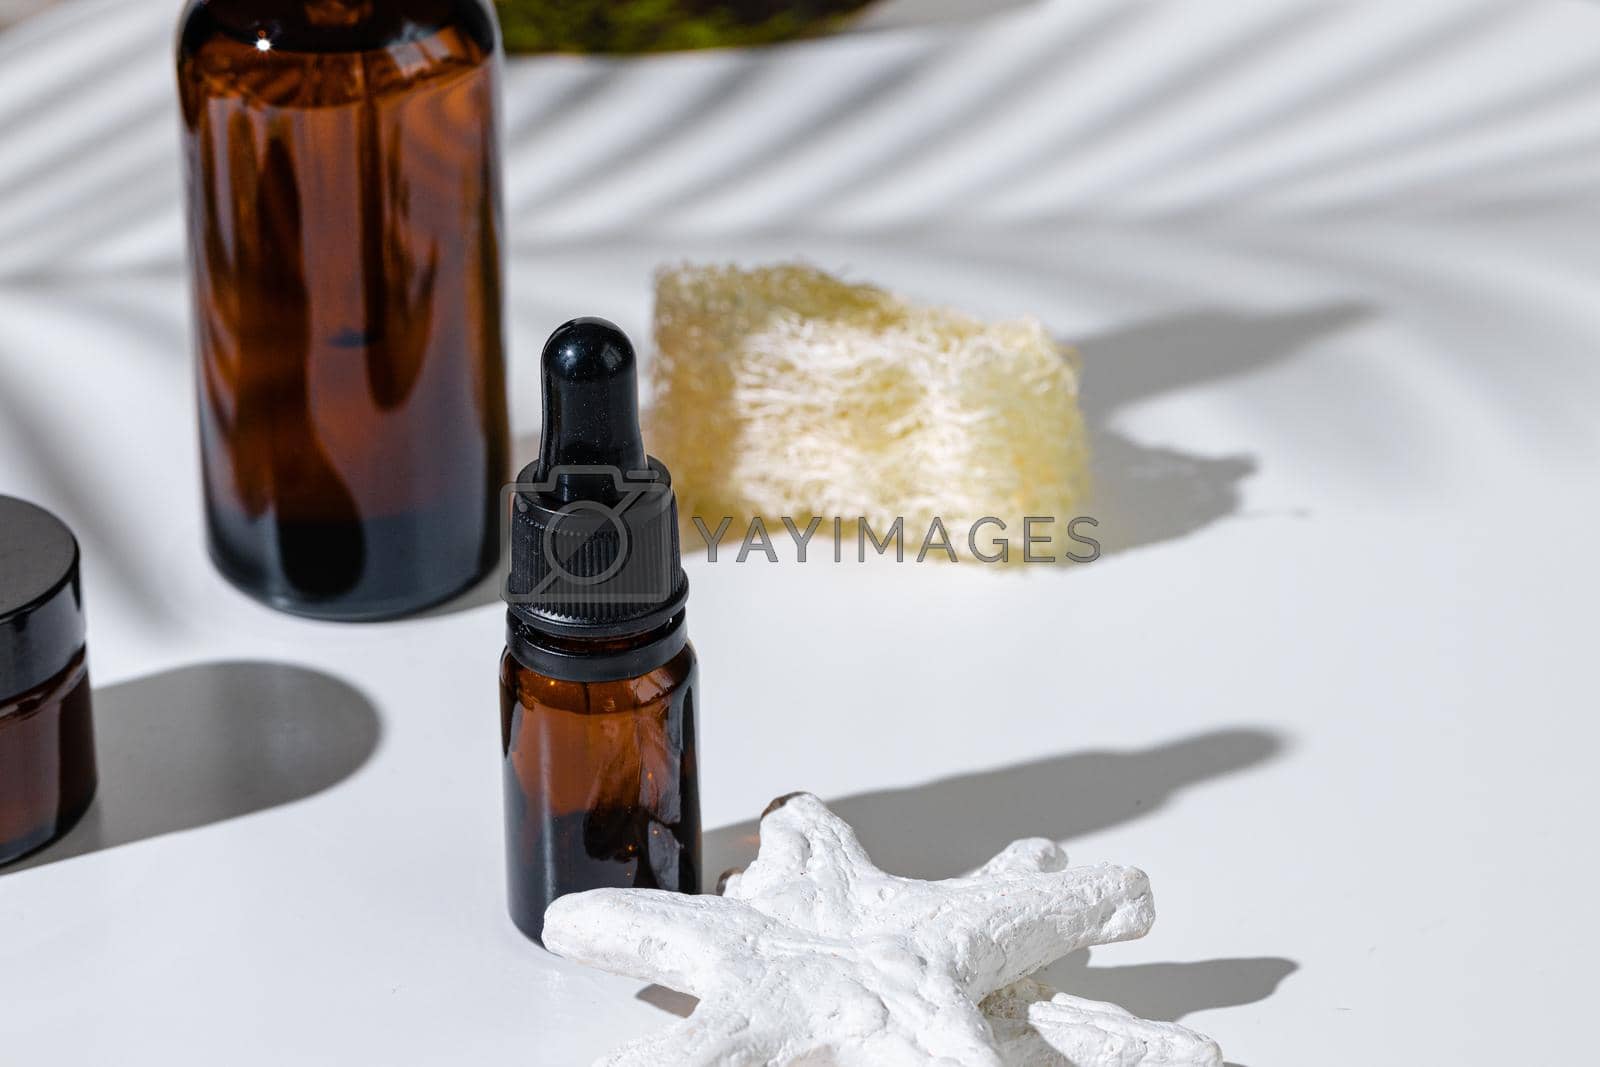 Royalty free image of Skincare products containers on a white background with creative shadows by Fabrikasimf